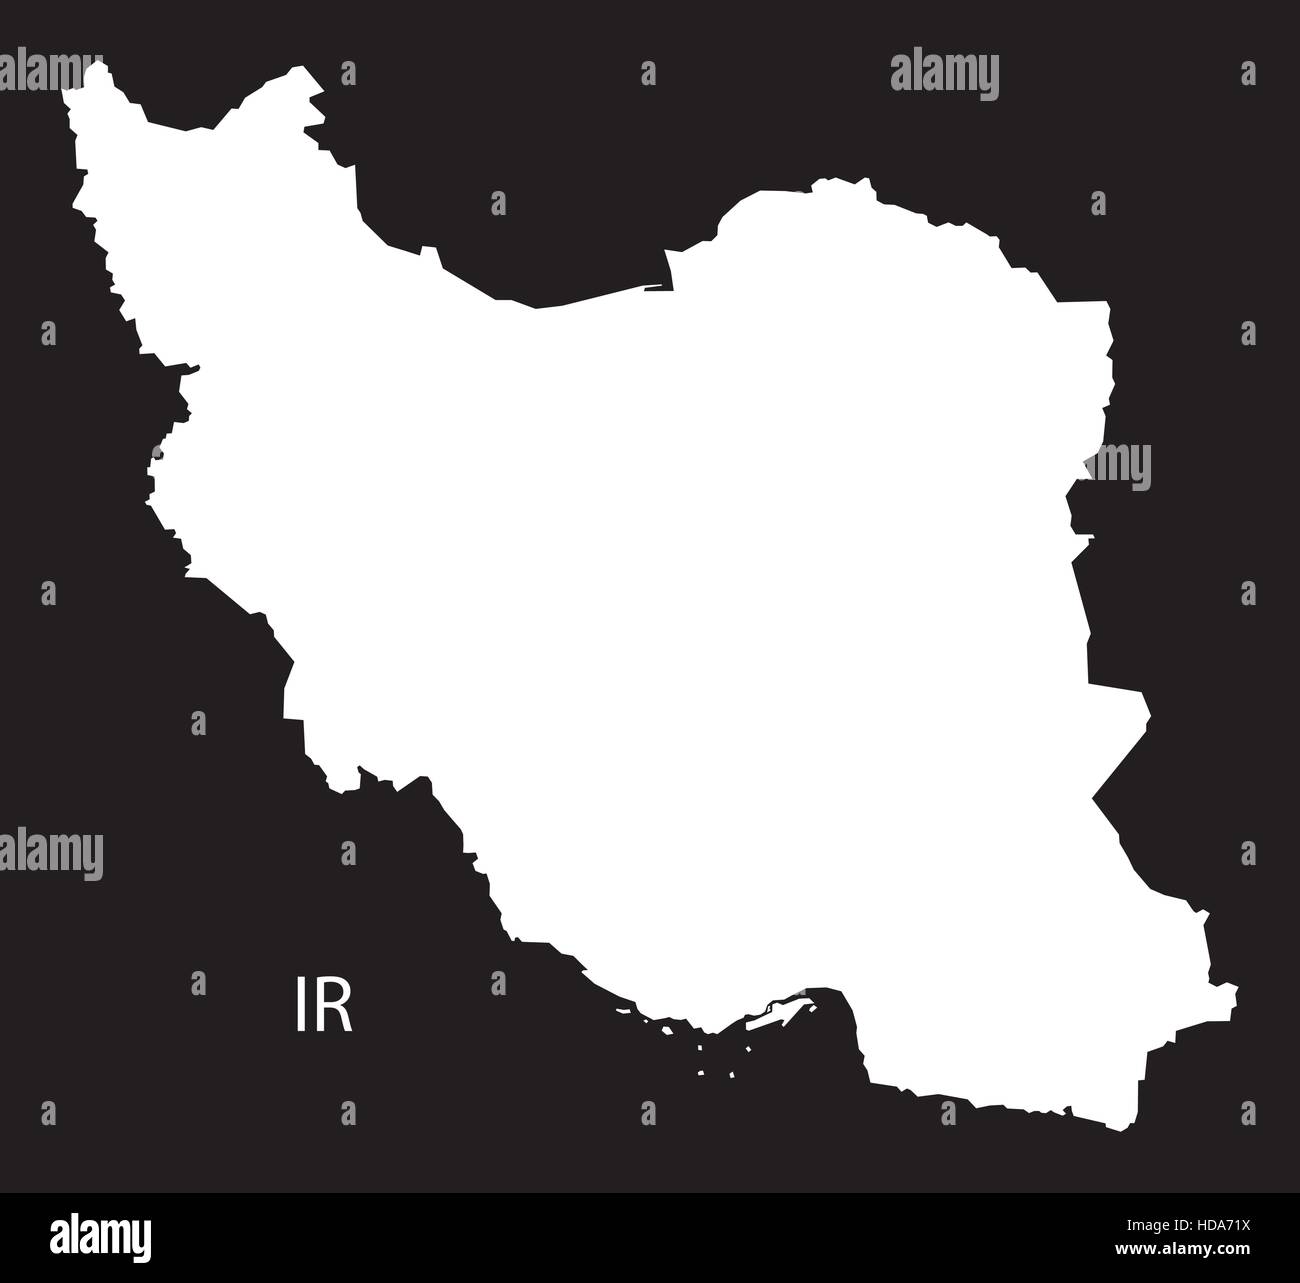 Iran Map black and white illustration Stock Vector